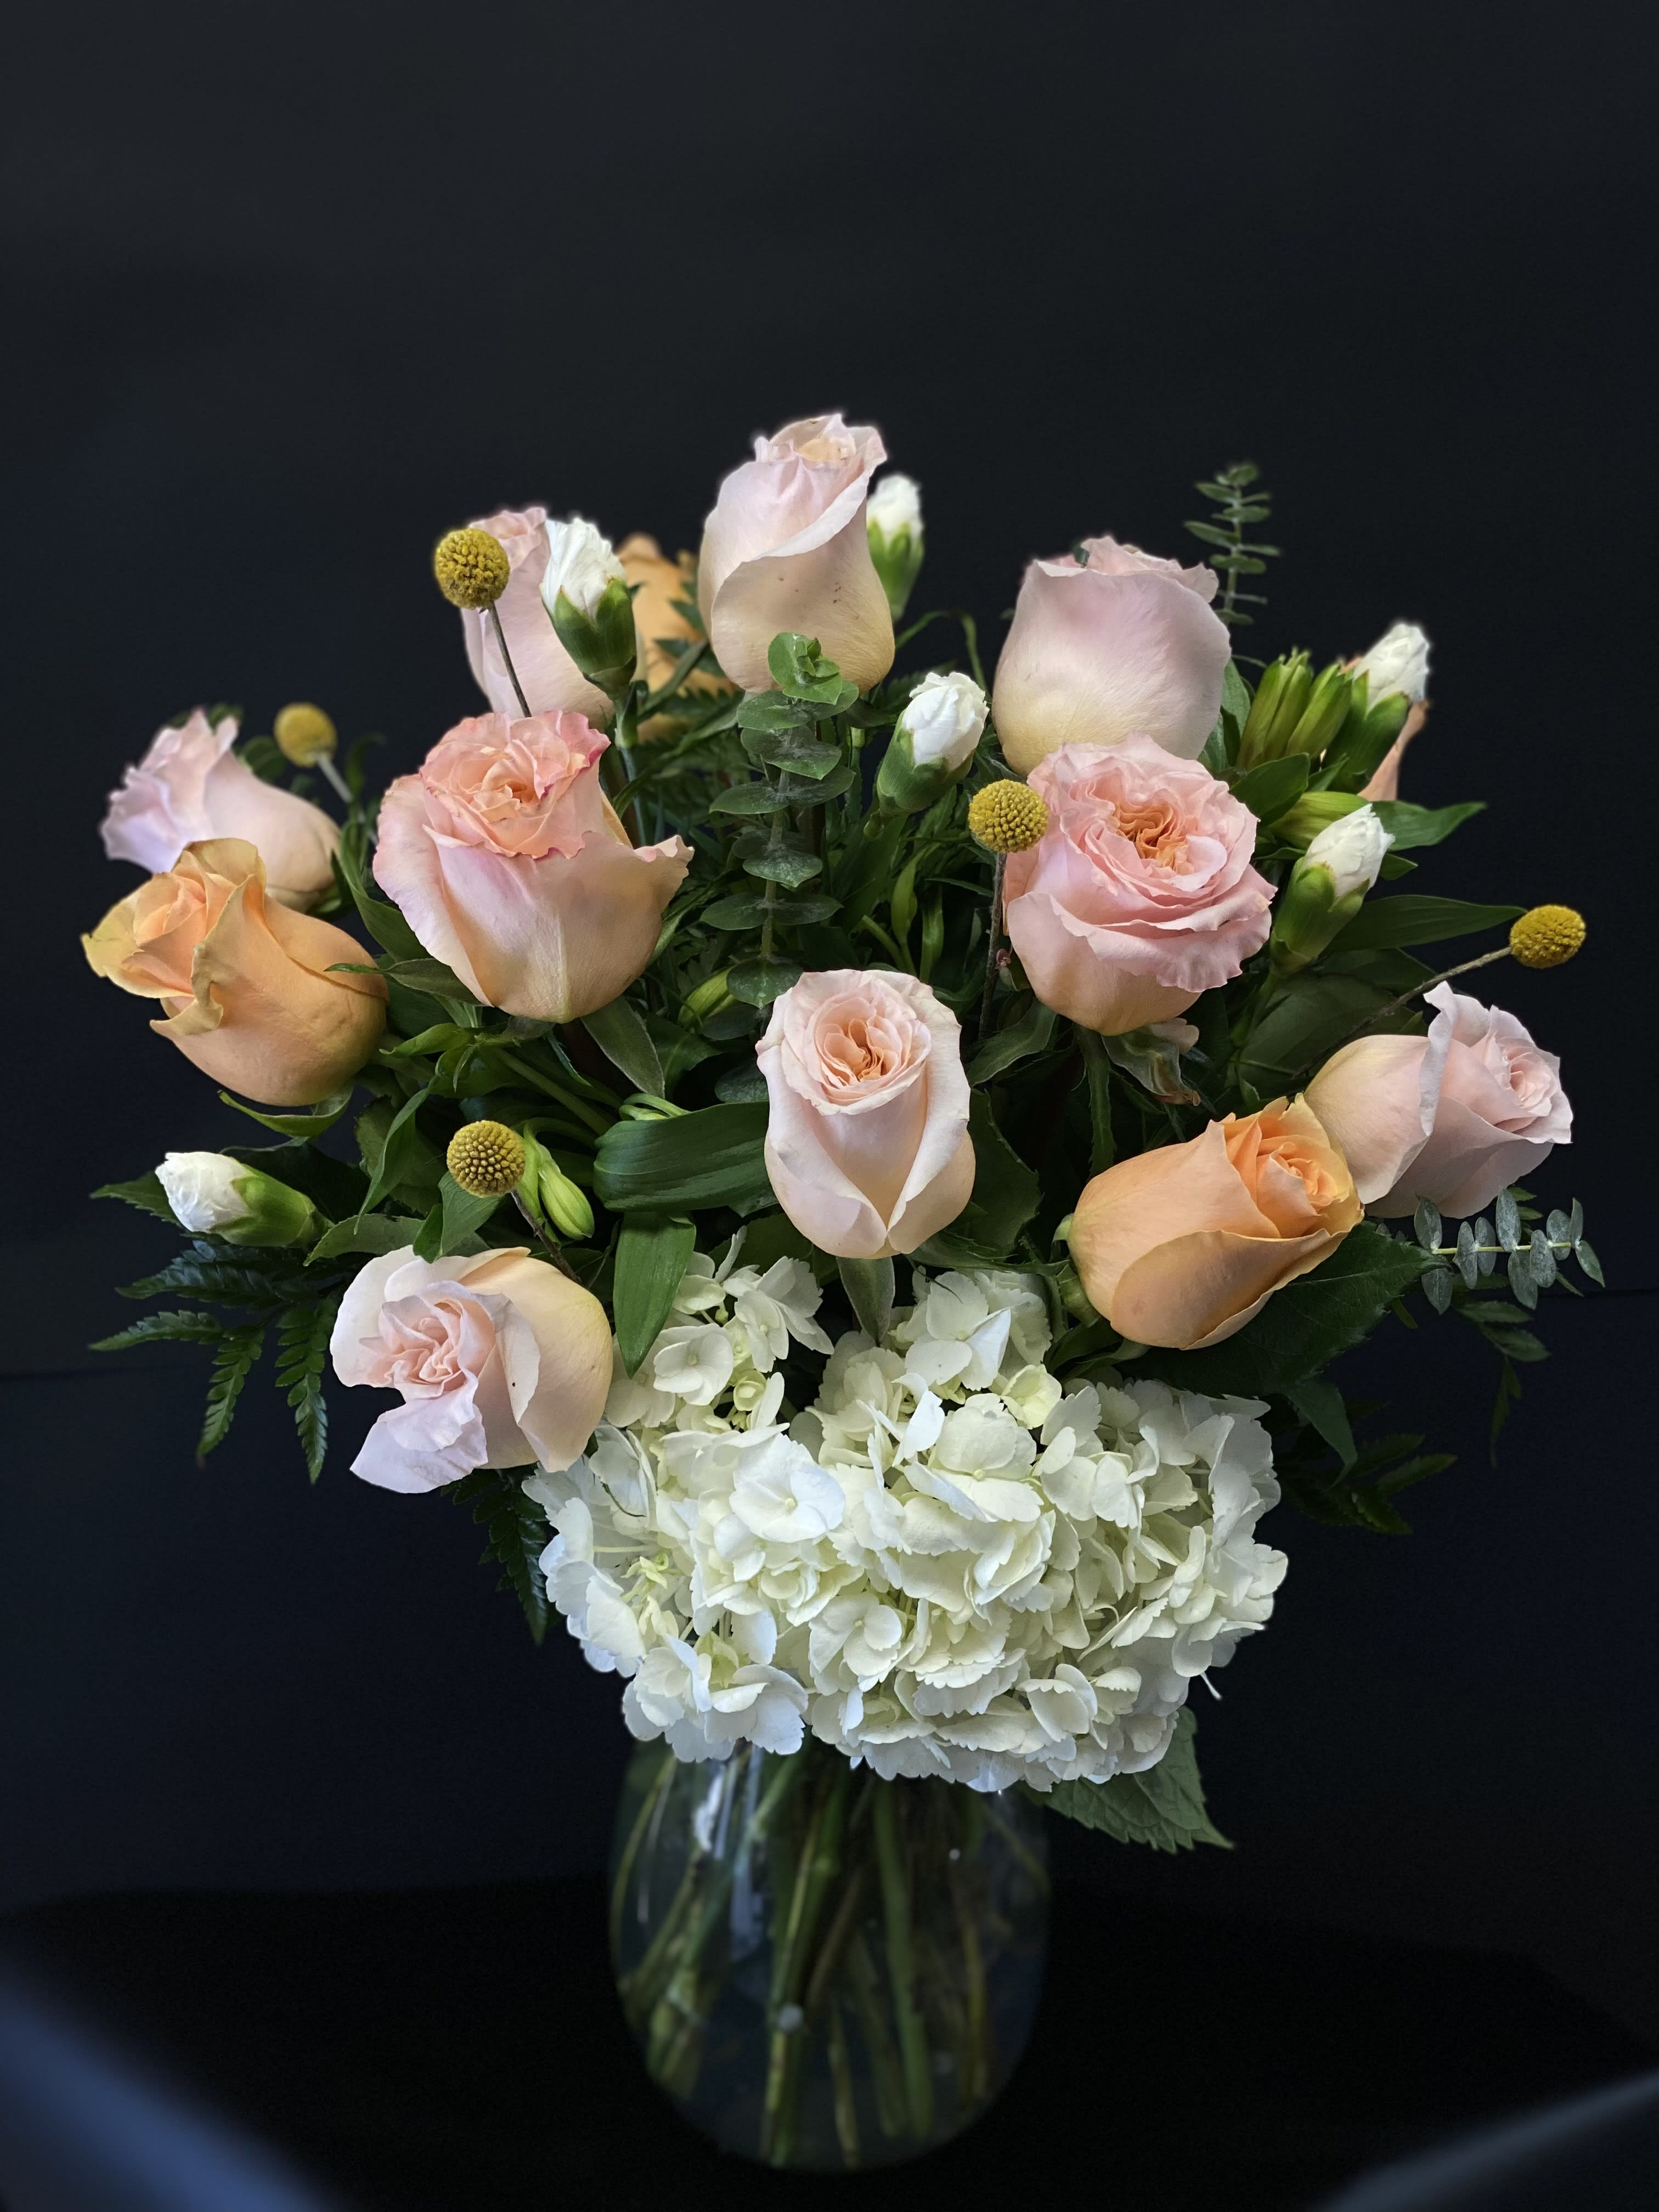 Gratitude  -  mix roses with alstroemeria, eucalyptus , hydrangea carnations , and billy balls  20h x 16w overall arrangement size 